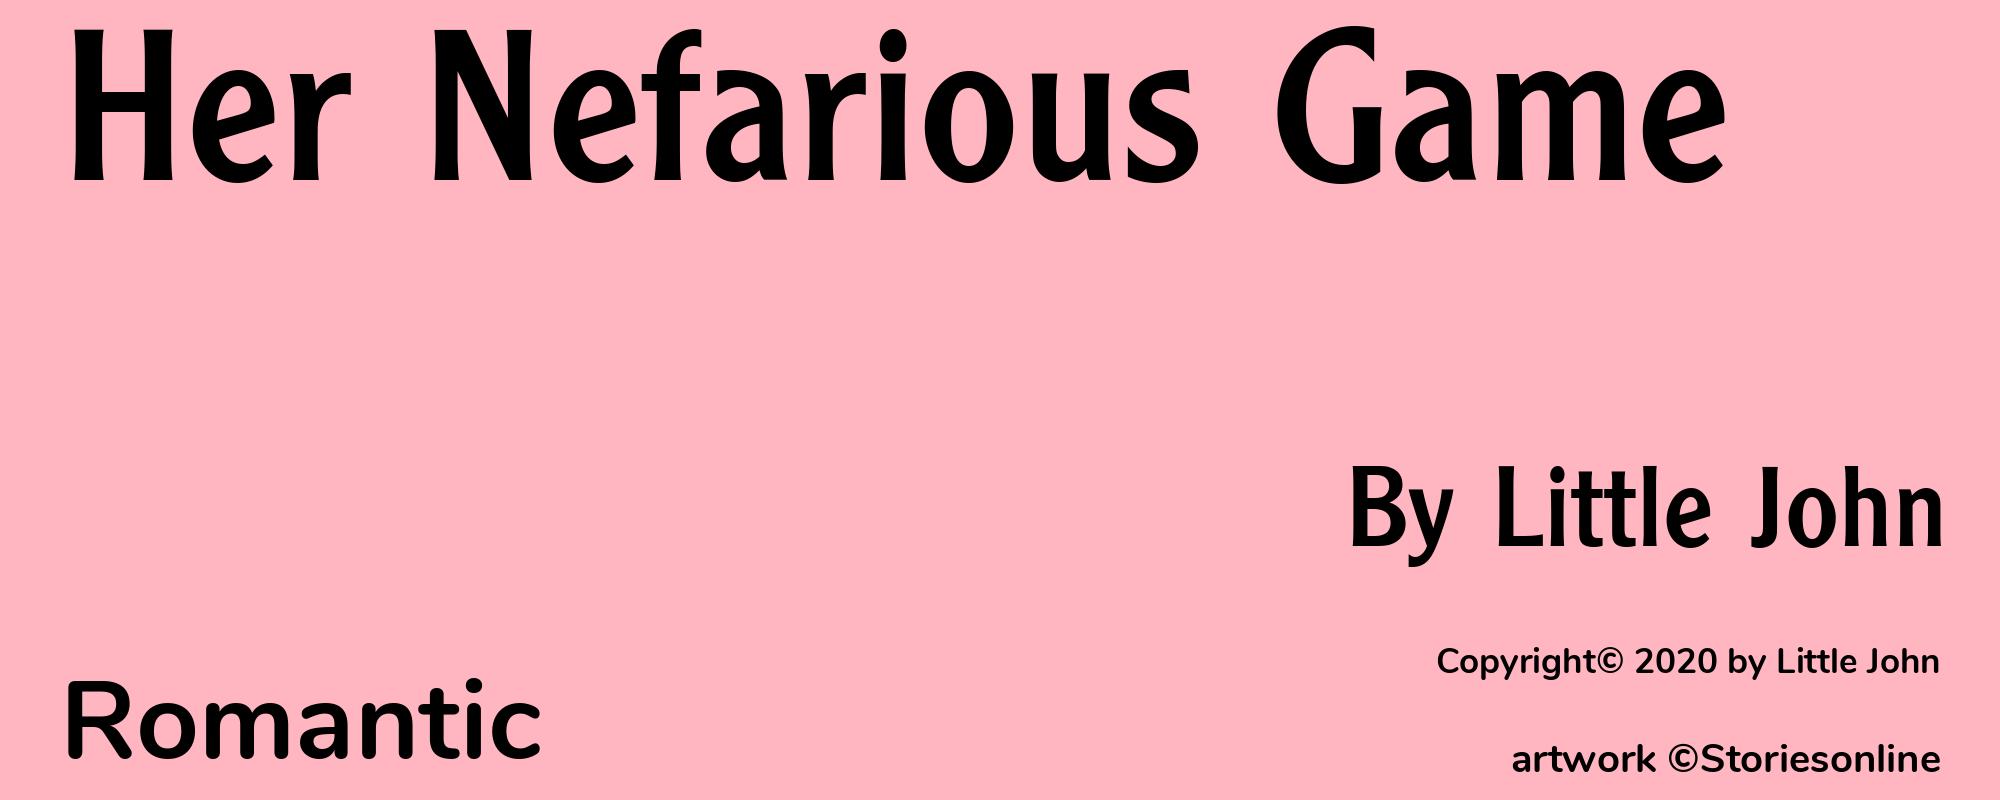 Her Nefarious Game - Cover